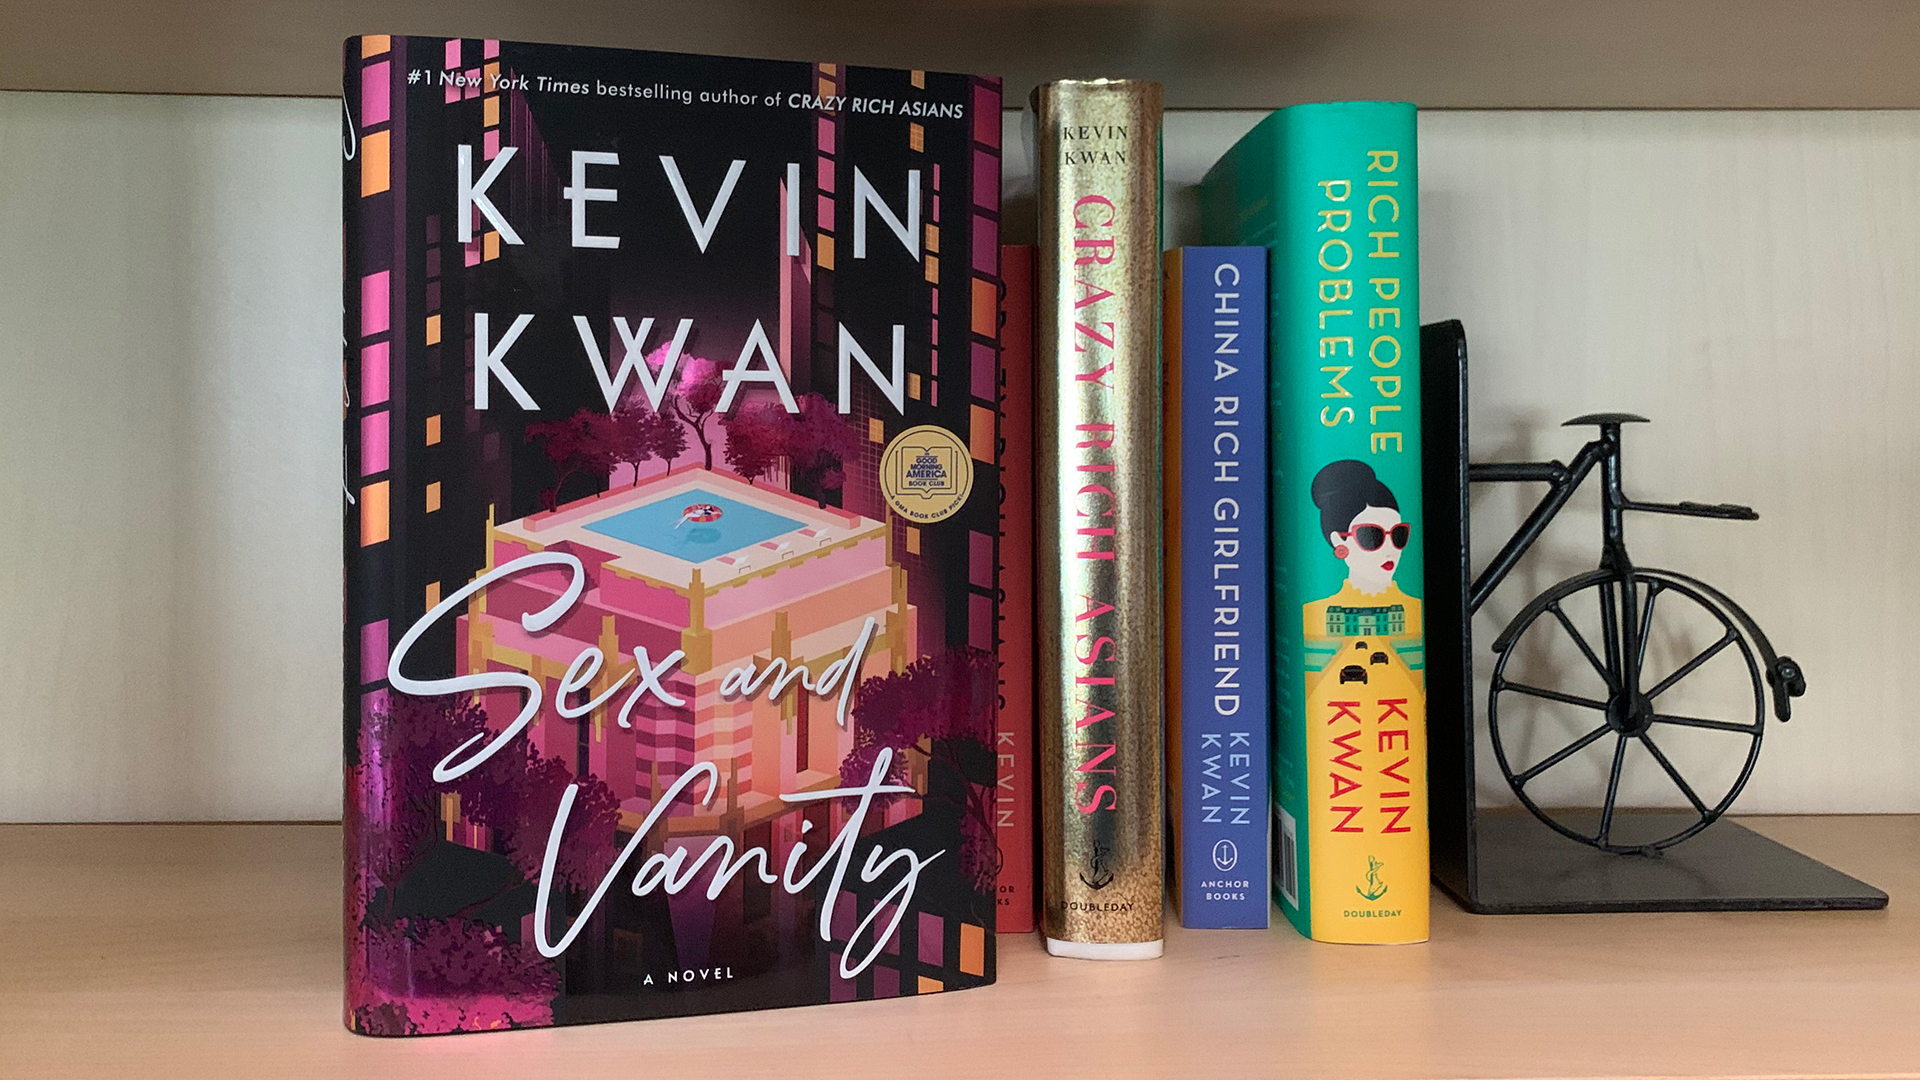 UHCL alum, best-selling author Kevin Kwan releases new novel